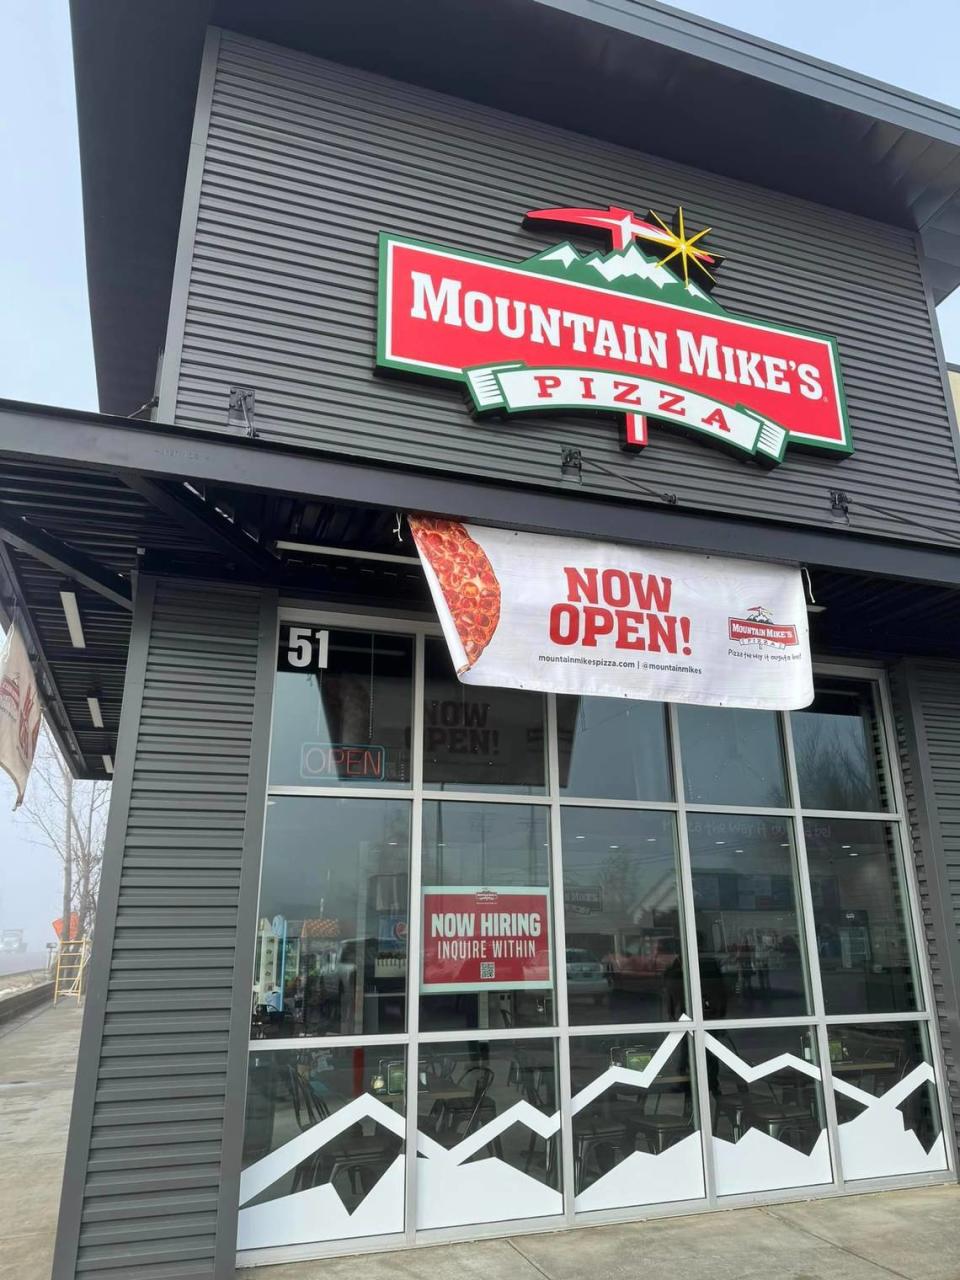 The second Idaho location of Mountain Mike’s Pizza is serving Star.